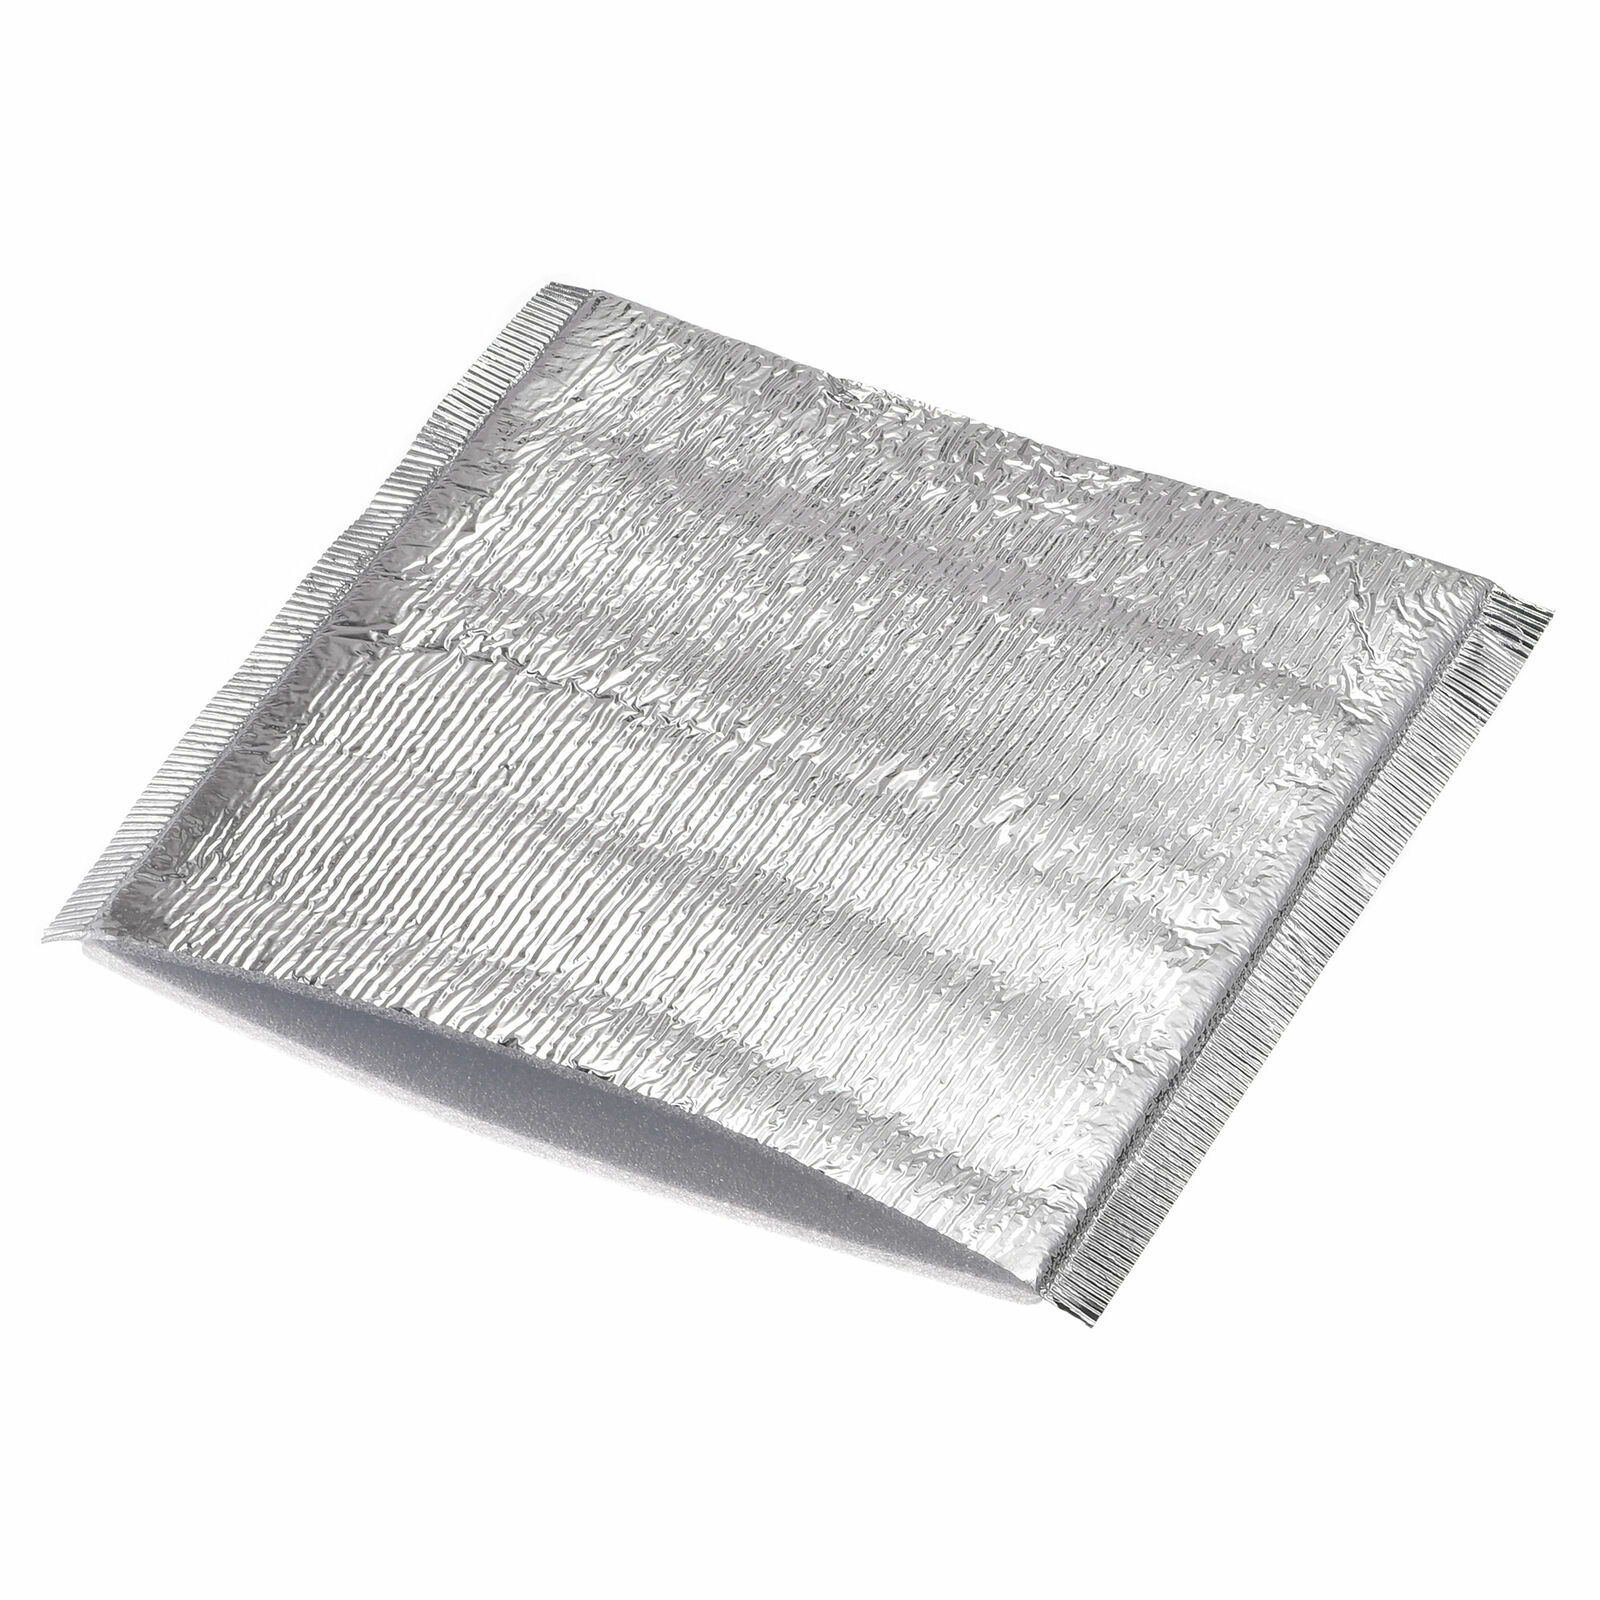 Reusable Thermal Insulation Bags 11.7x11.7in For Delivery Box Lining 50pcs